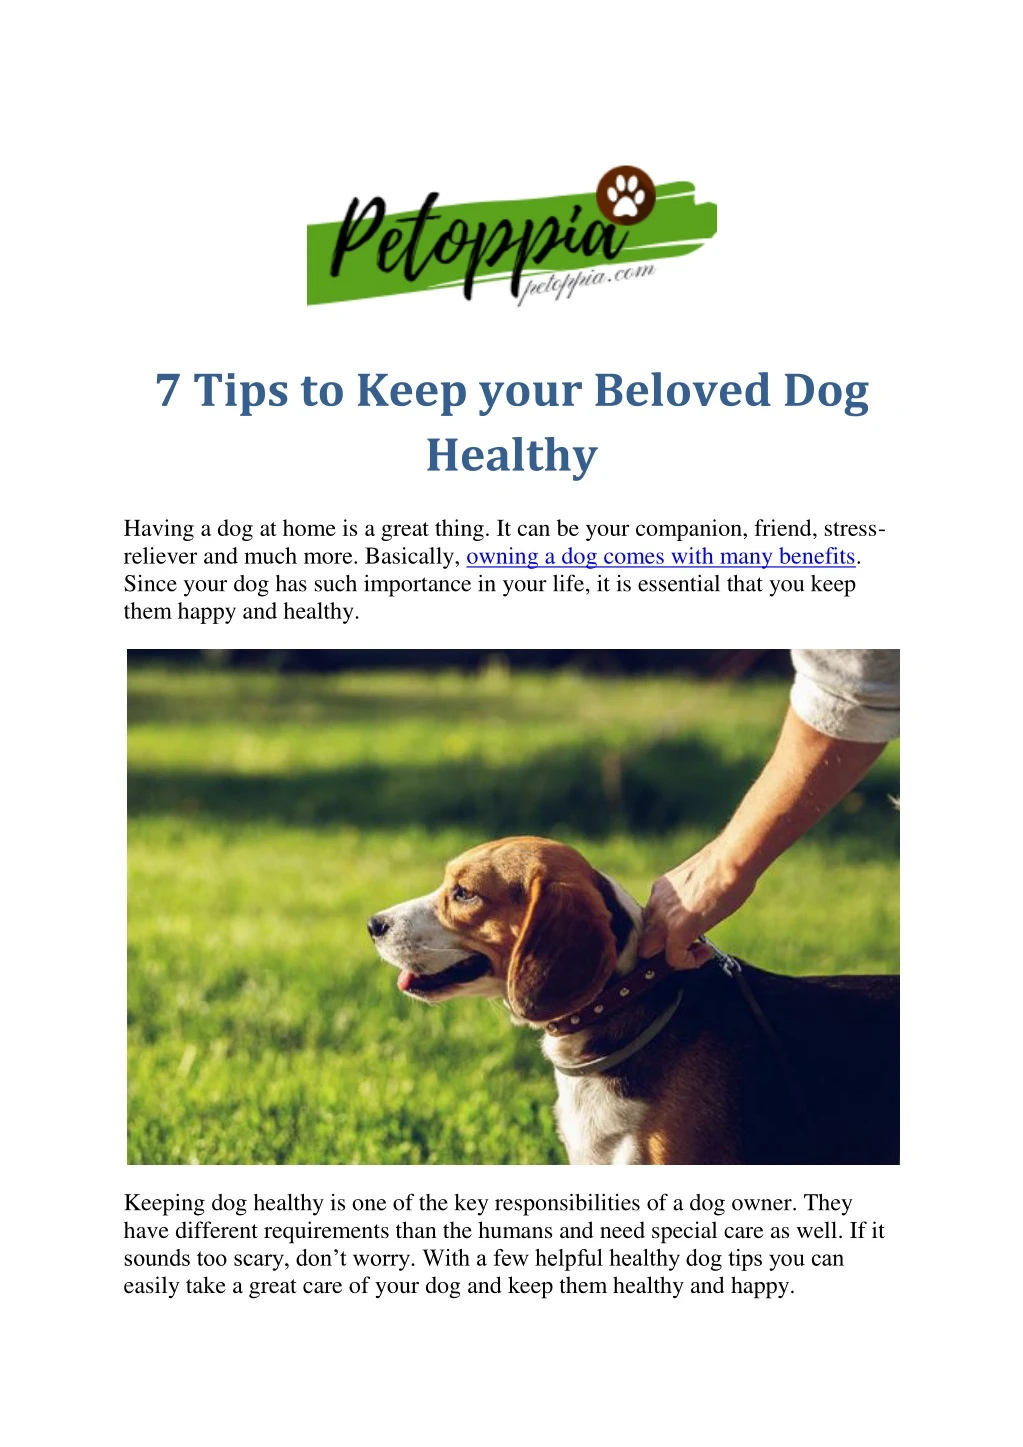 7 tips to keep your beloved dog healthy